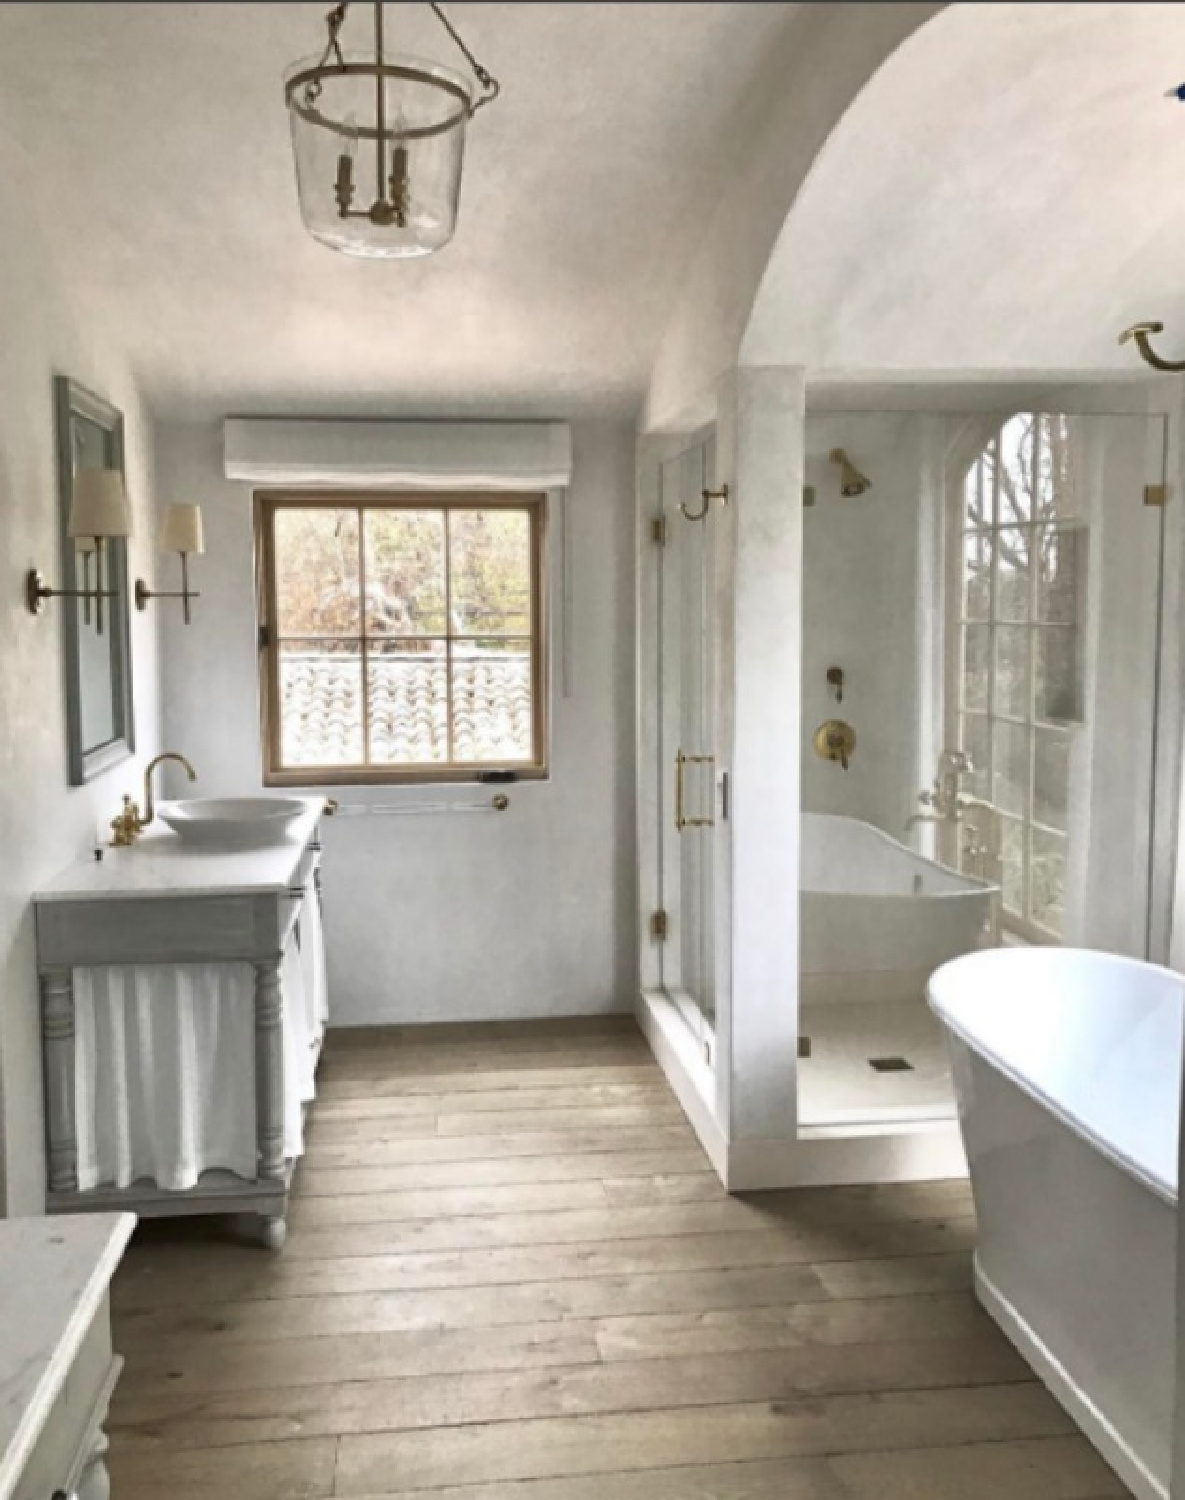 Bathroom - Steve Giannetti designed modern Mediterranean Malibu home with white oak, natural finishes, limestone, and Old World style. #giannettihome #patinastyle #patinahomes